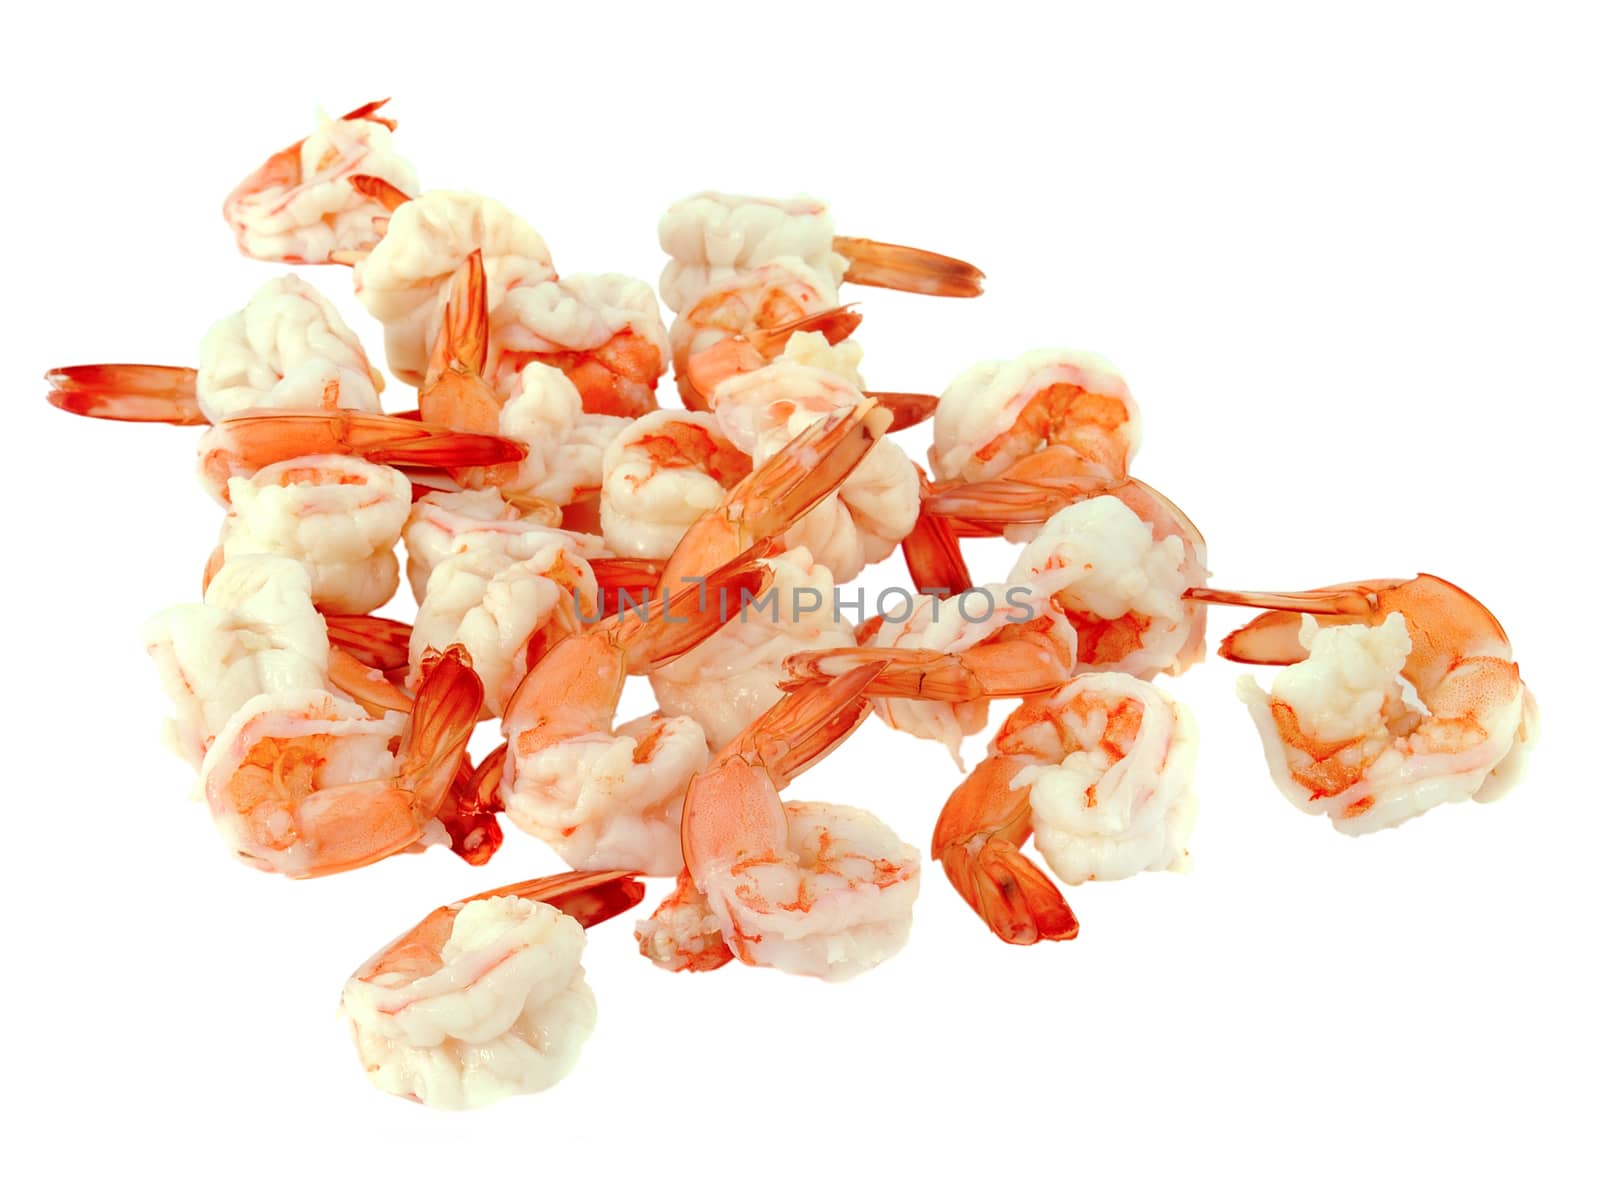  shrimps on a white background by sommai